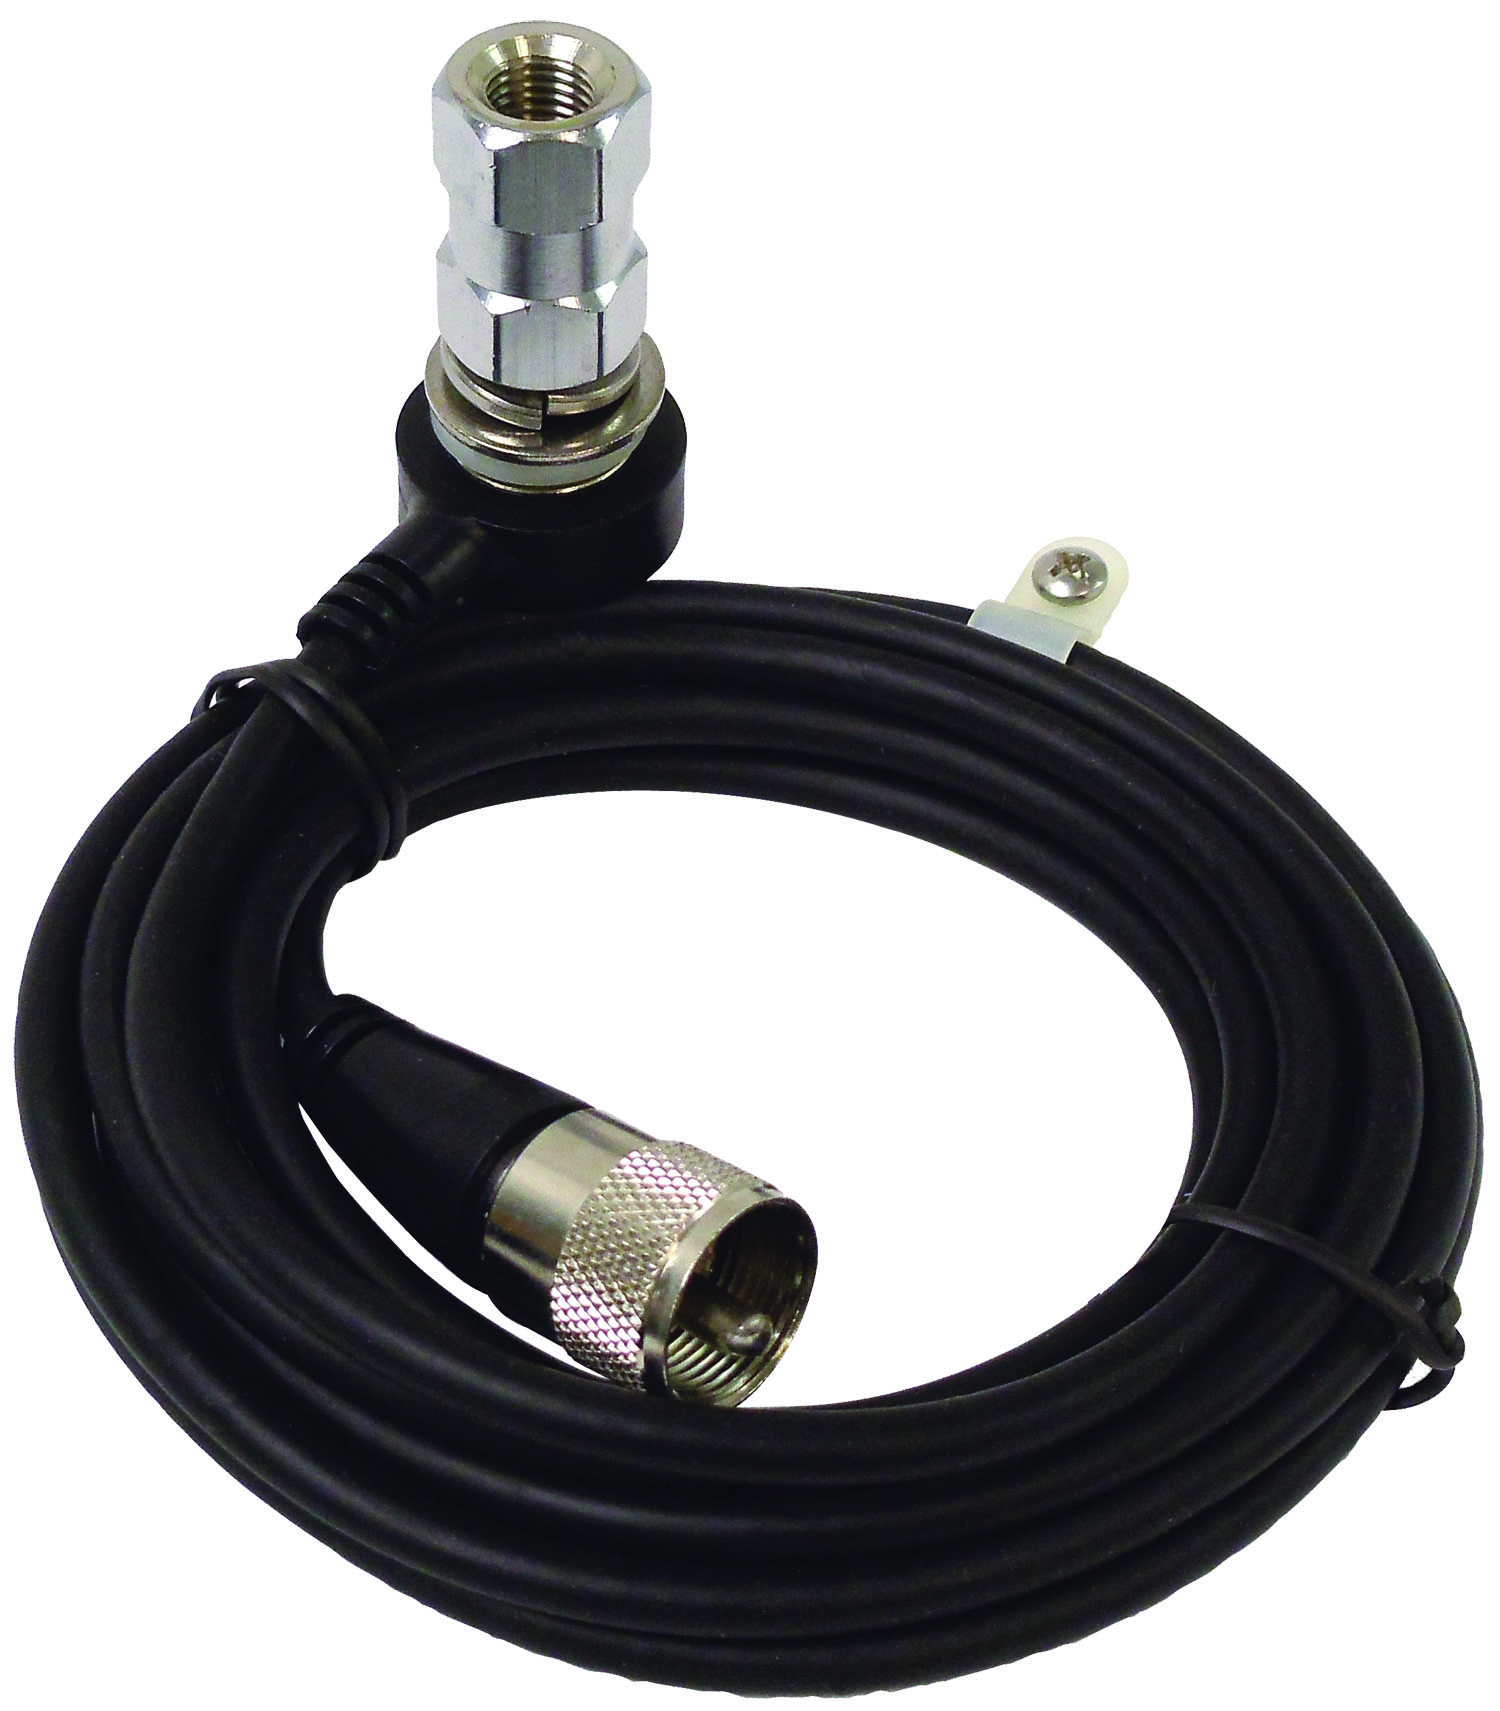 18' Firering Coax With K4 Stud - Click Image to Close